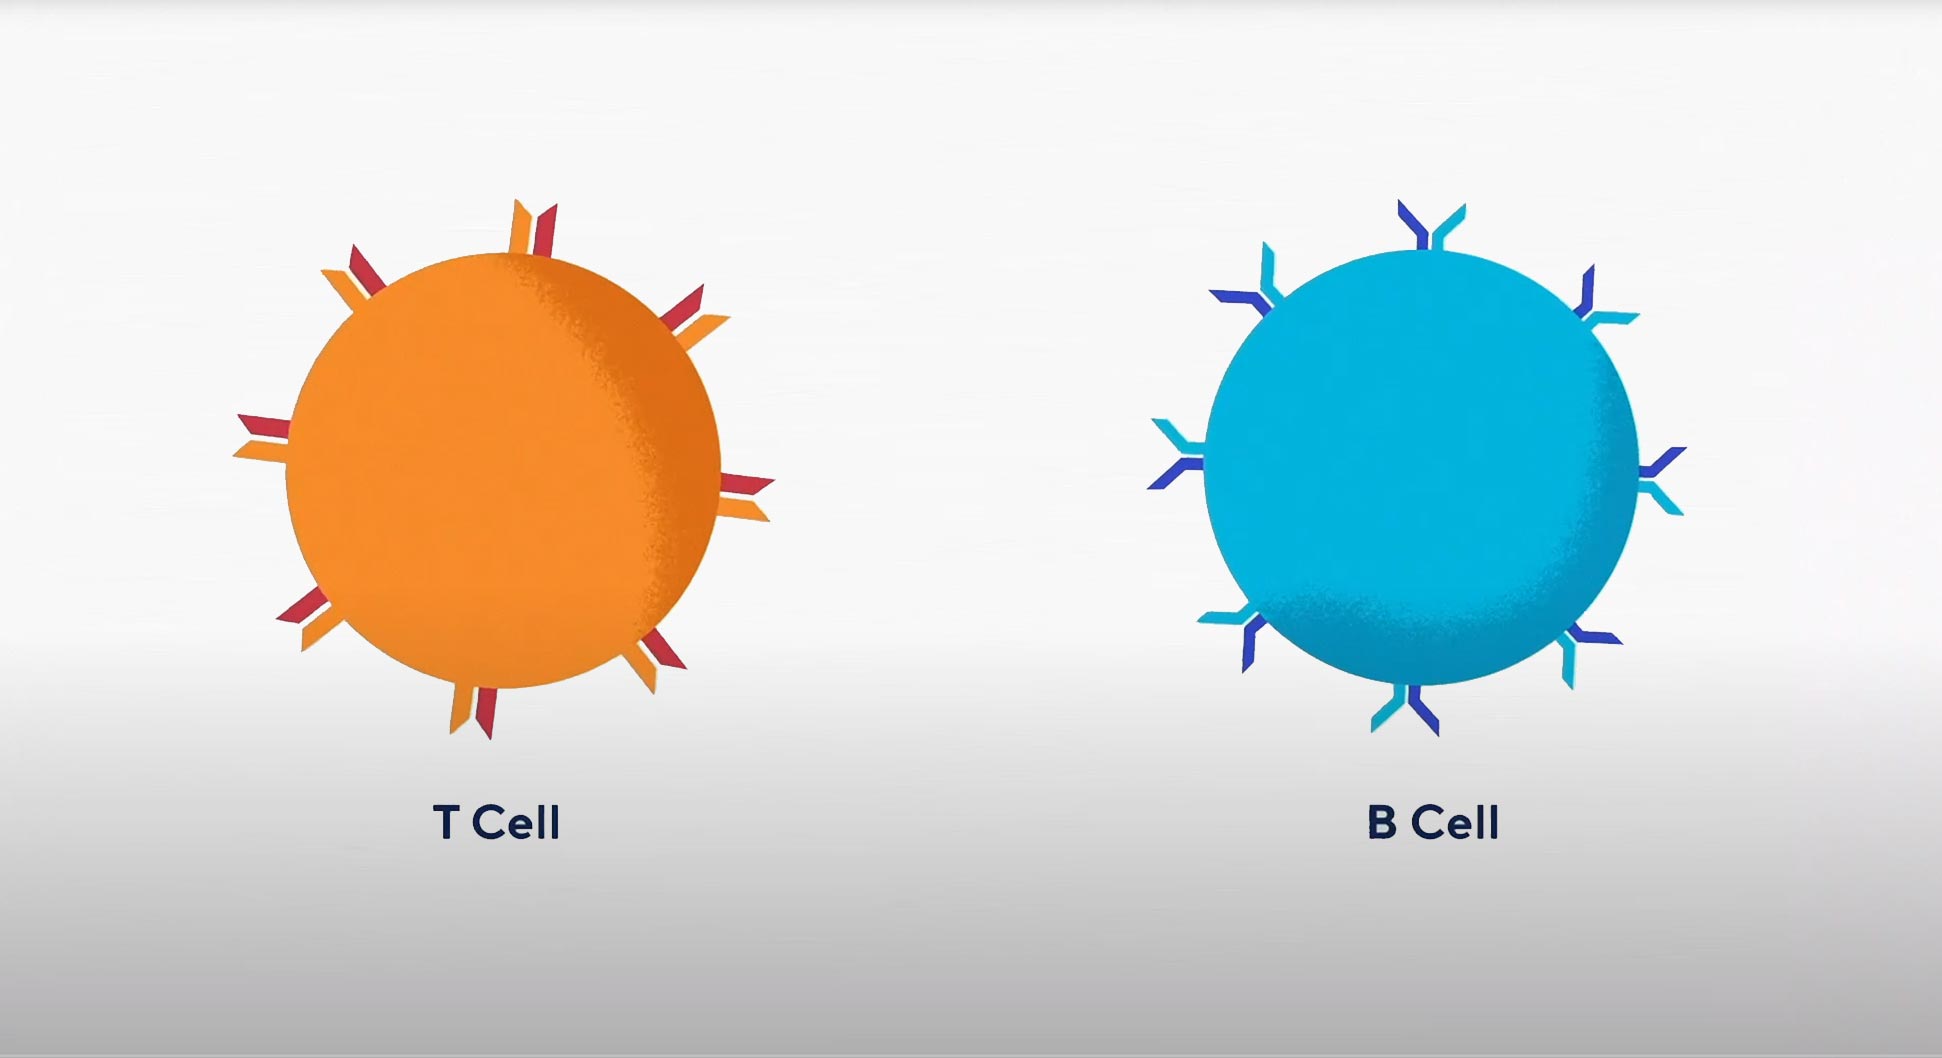 Image of T Cell and B Cell